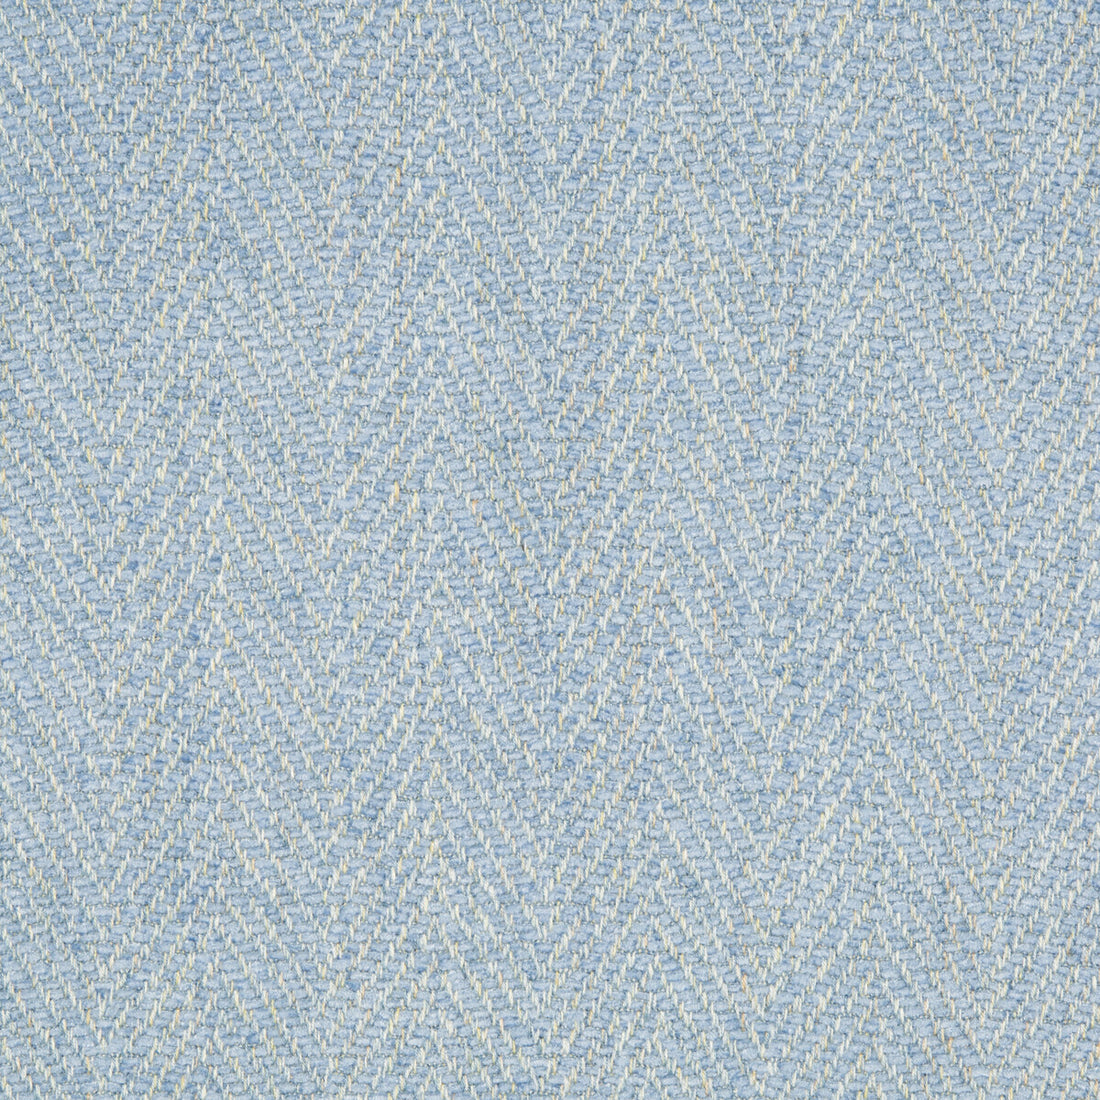 Firle Chenille II fabric in sky color - pattern 8017140.15.0 - by Brunschwig &amp; Fils in the Baronet collection